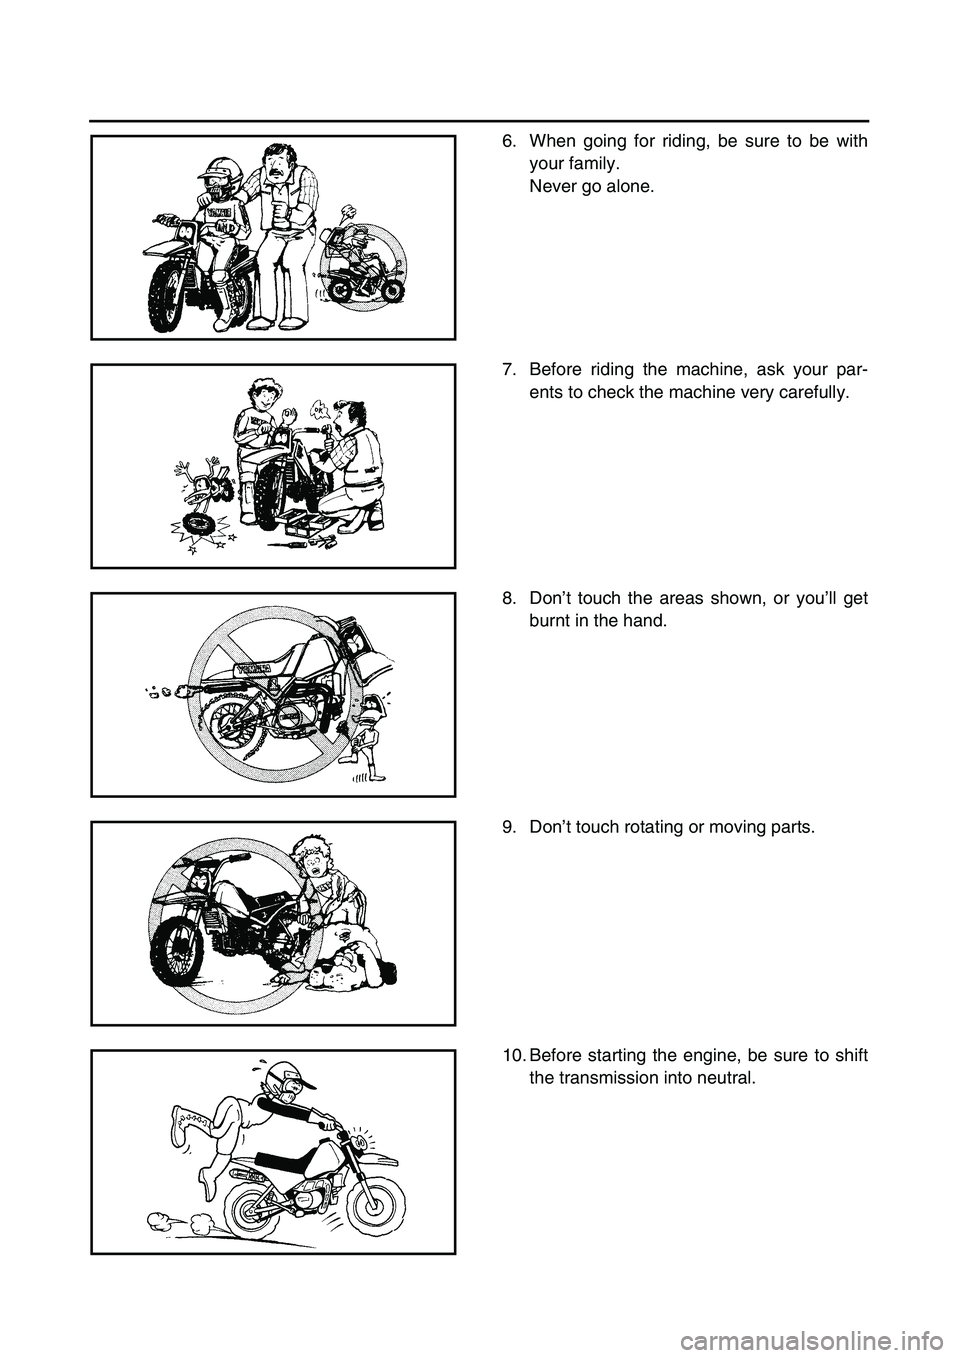 YAMAHA TTR90 2003  Owners Manual  
6. When going for riding, be sure to be with
your family.
Never go alone. 
7. Before riding the machine, ask your par-
ents to check the machine very carefully. 
8. Don’t touch the areas shown, or